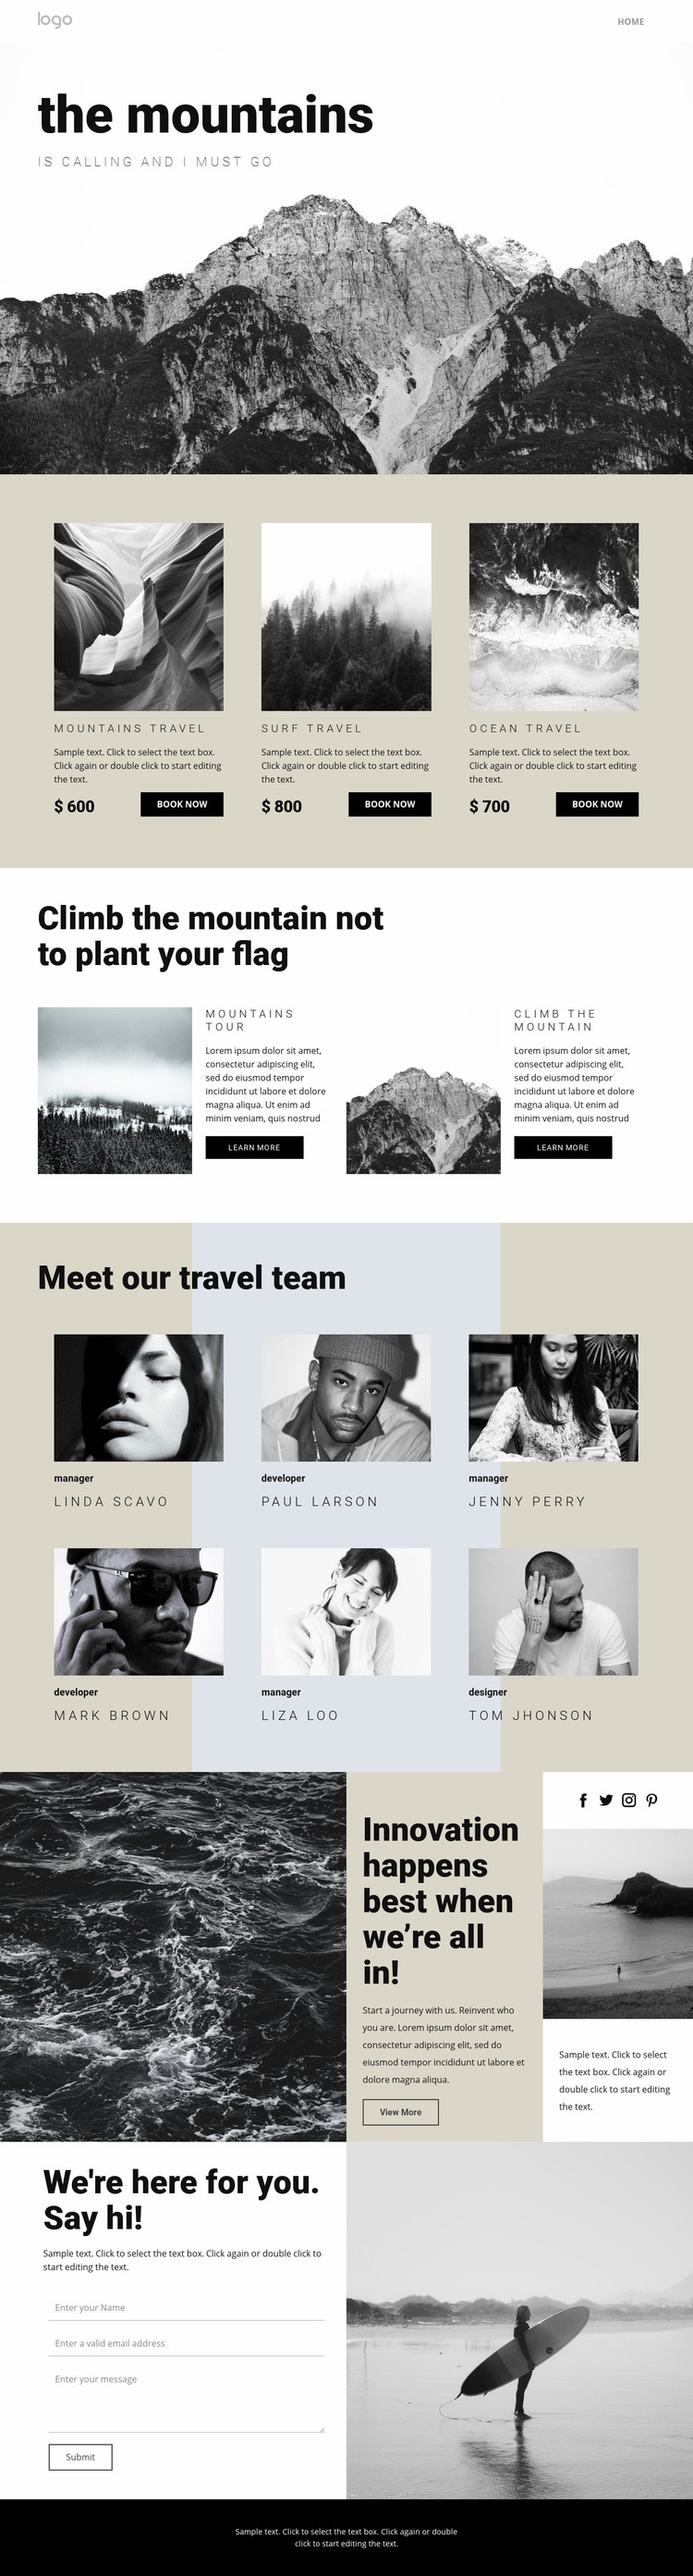 Agency for people who travel Web Page Design